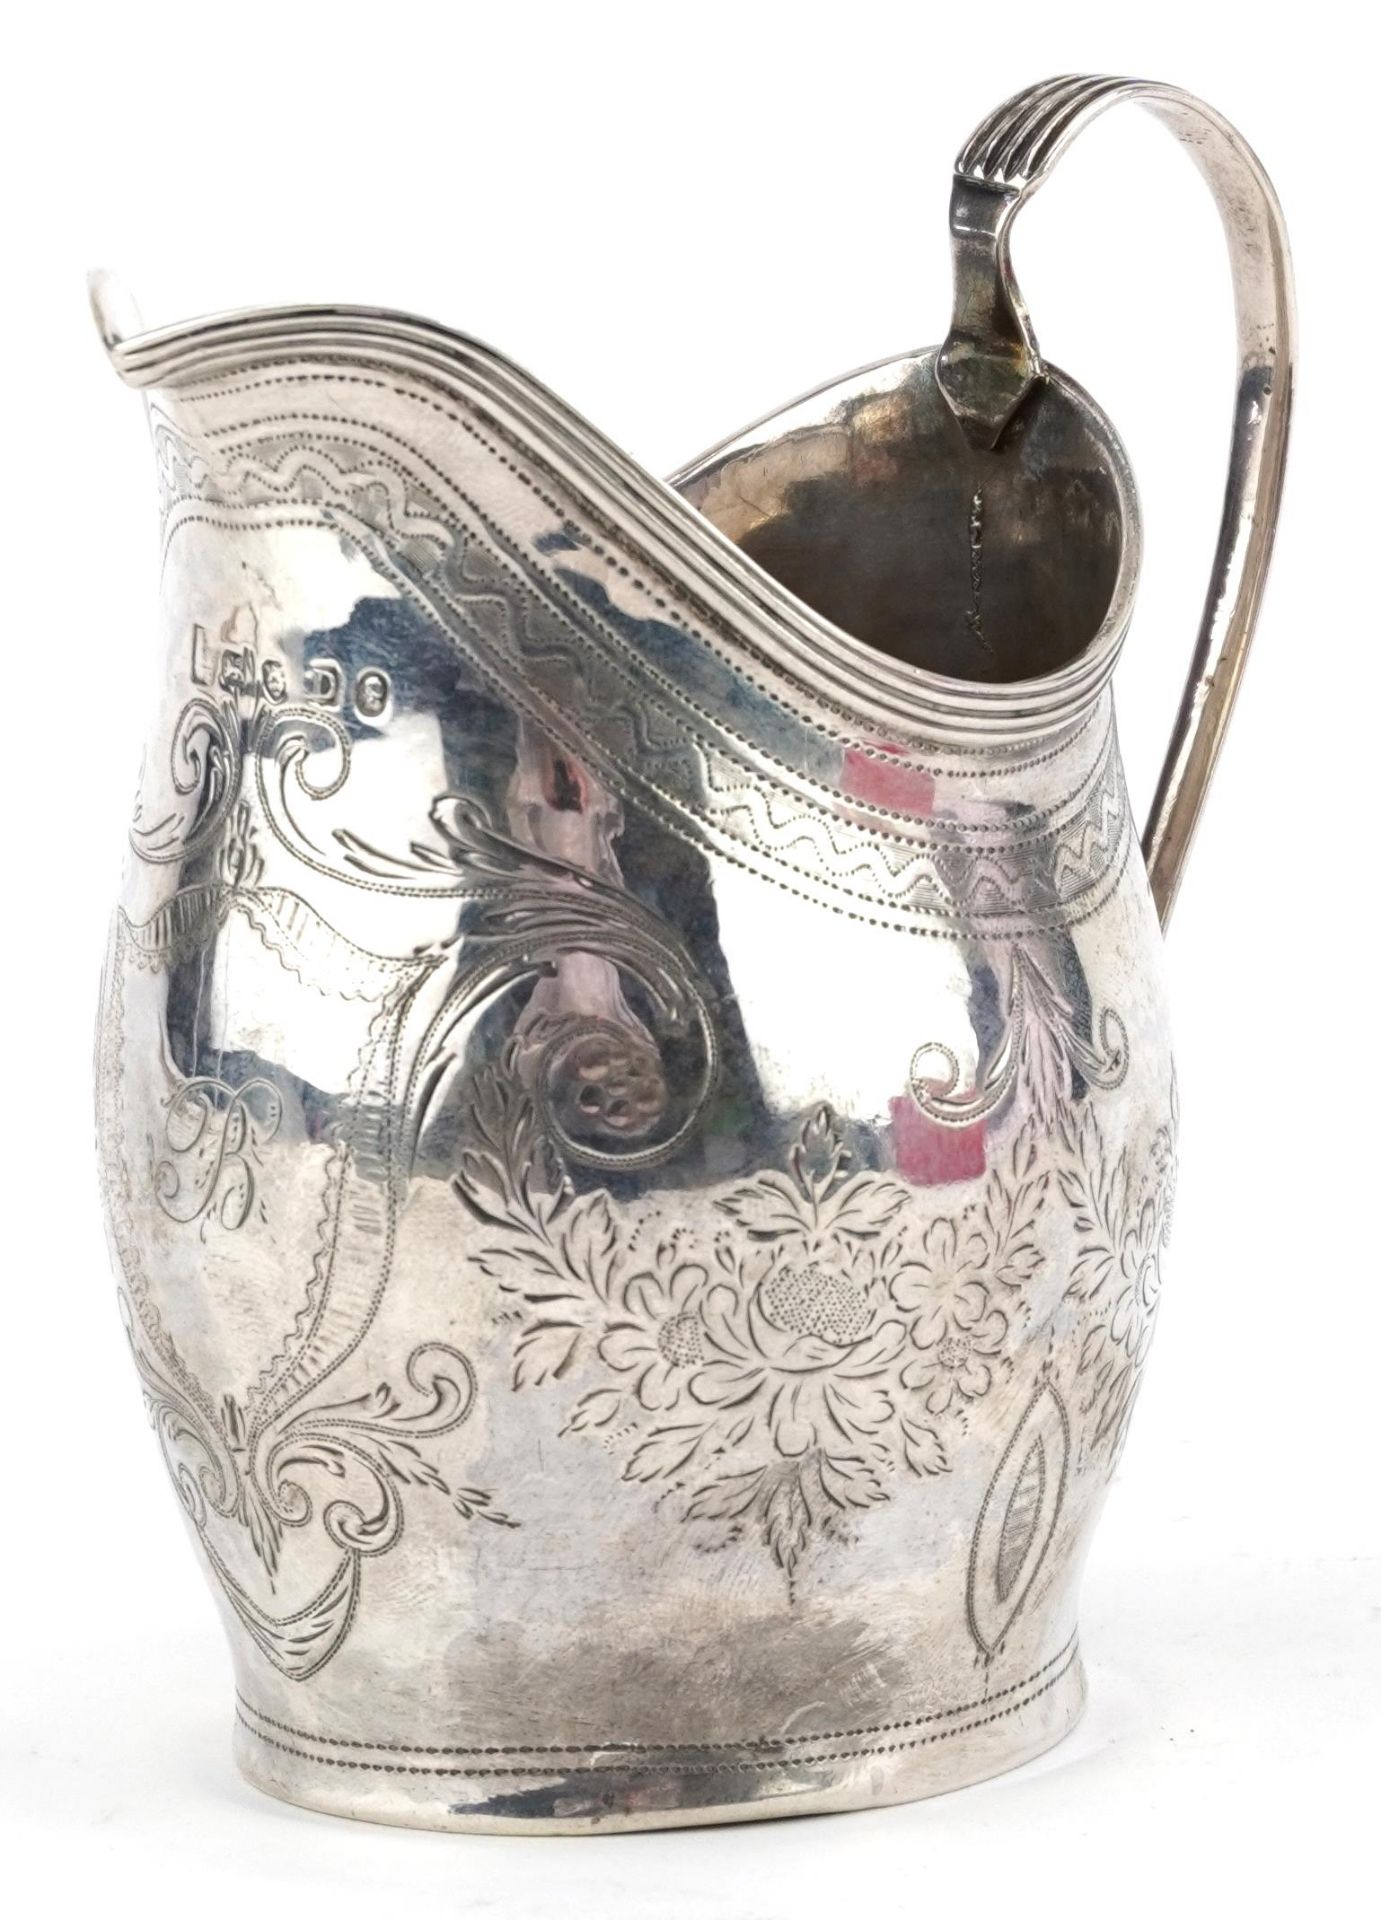 George III silver cream jug engraved with flowers and foliage, indistinct maker's mark, London 1799,